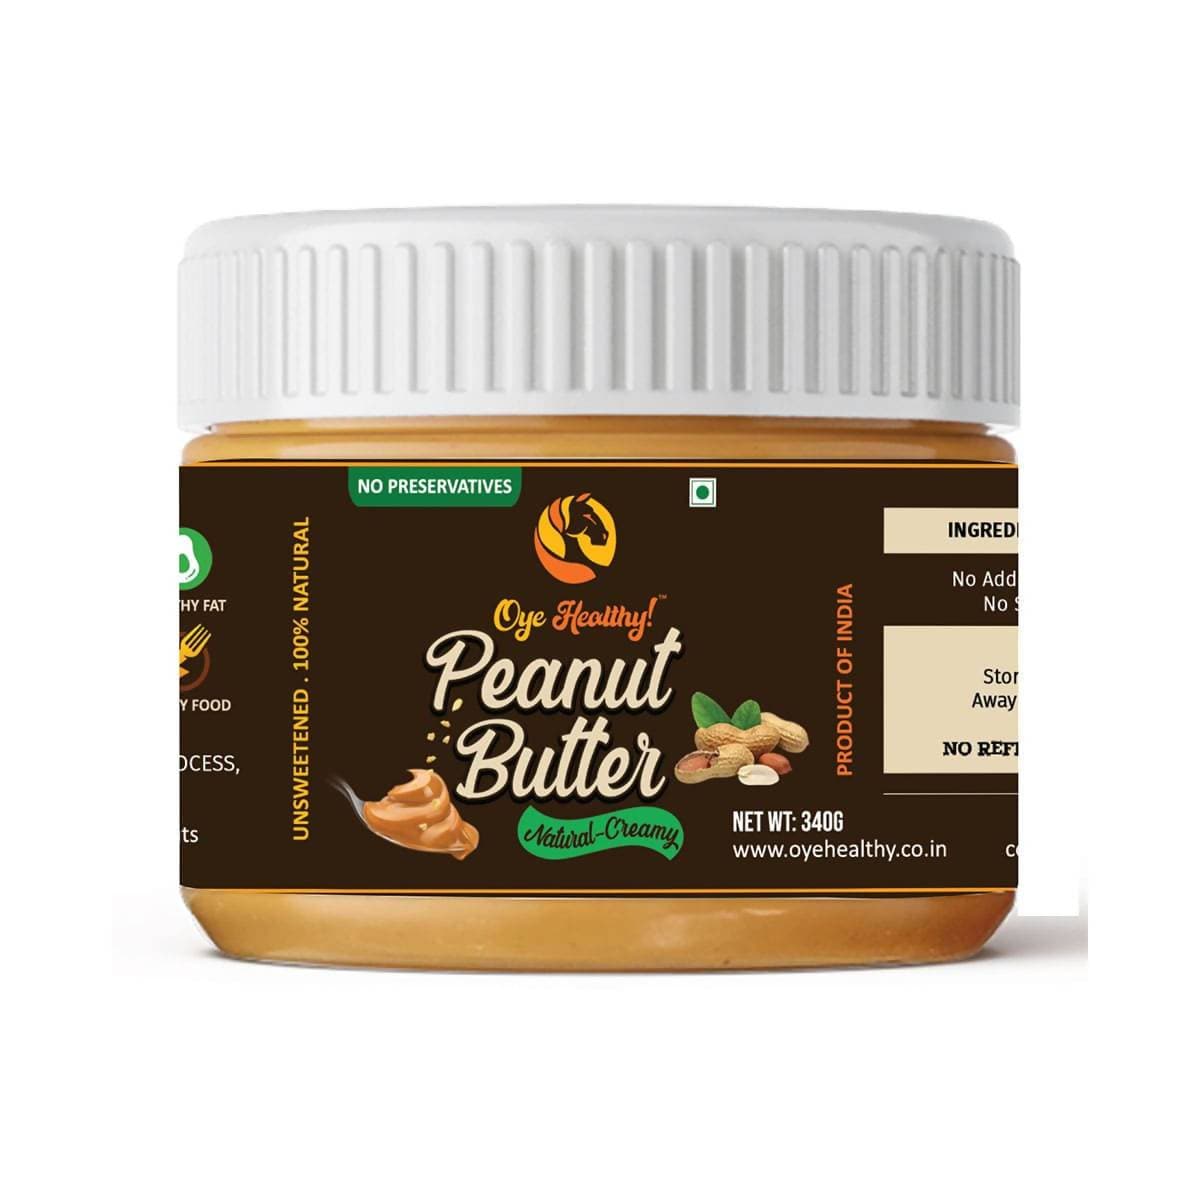 Oye Healthy! Peanut Butter Natural Creamy - Combo Pack of 2 ( 850gm + 340gm )